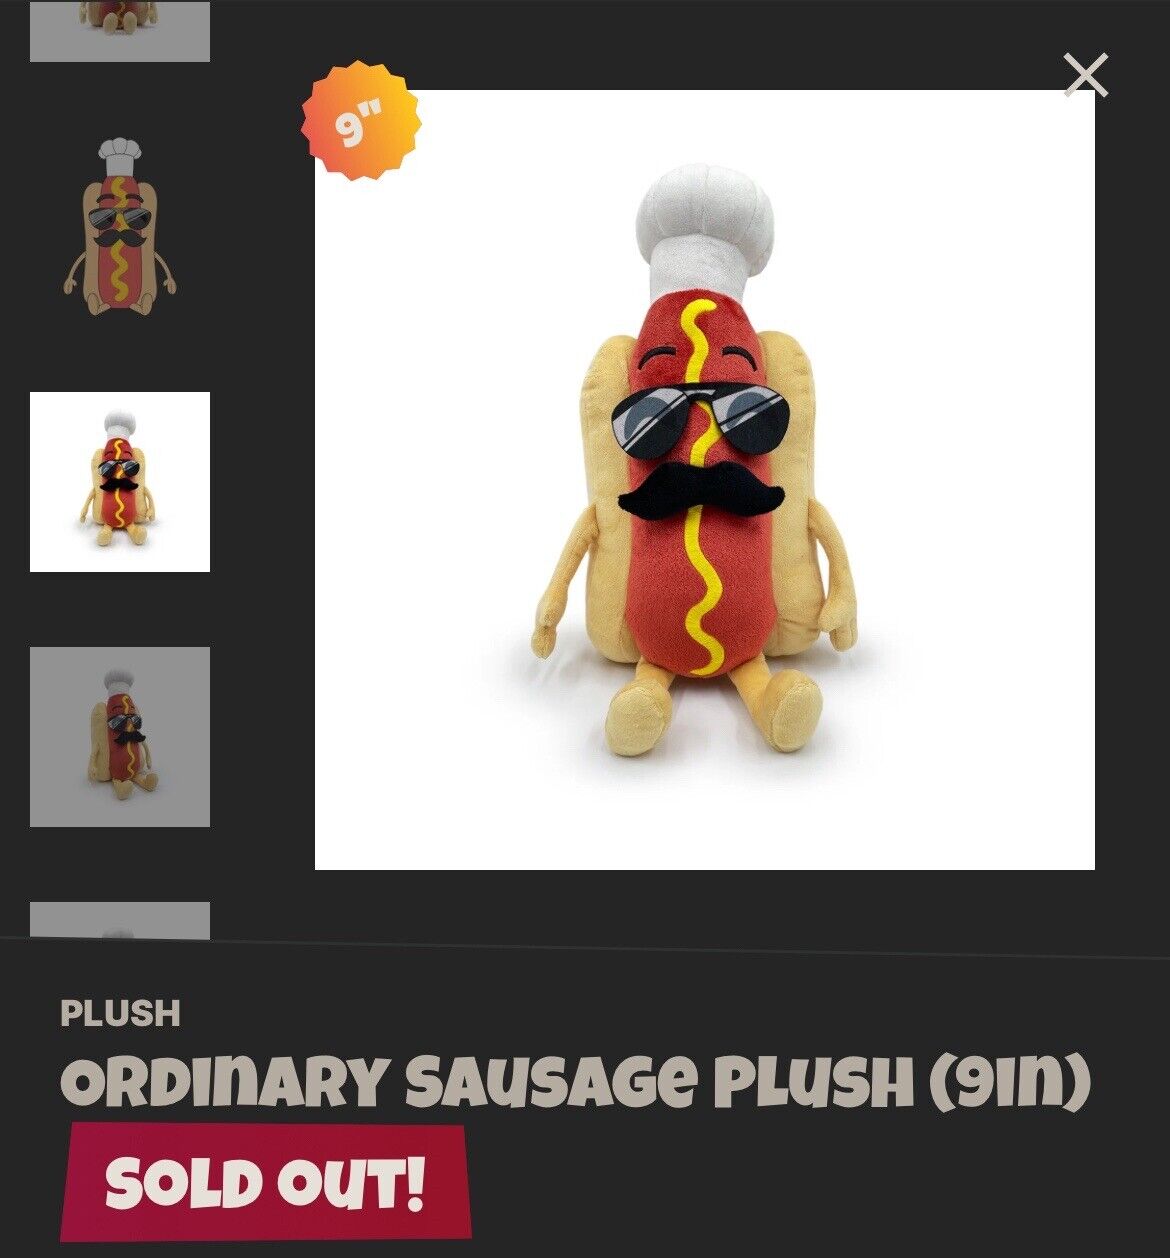 YOUTOOZ * Ordinary Sausage * 9 in* Plush * NEW * Sold Out * In Hand